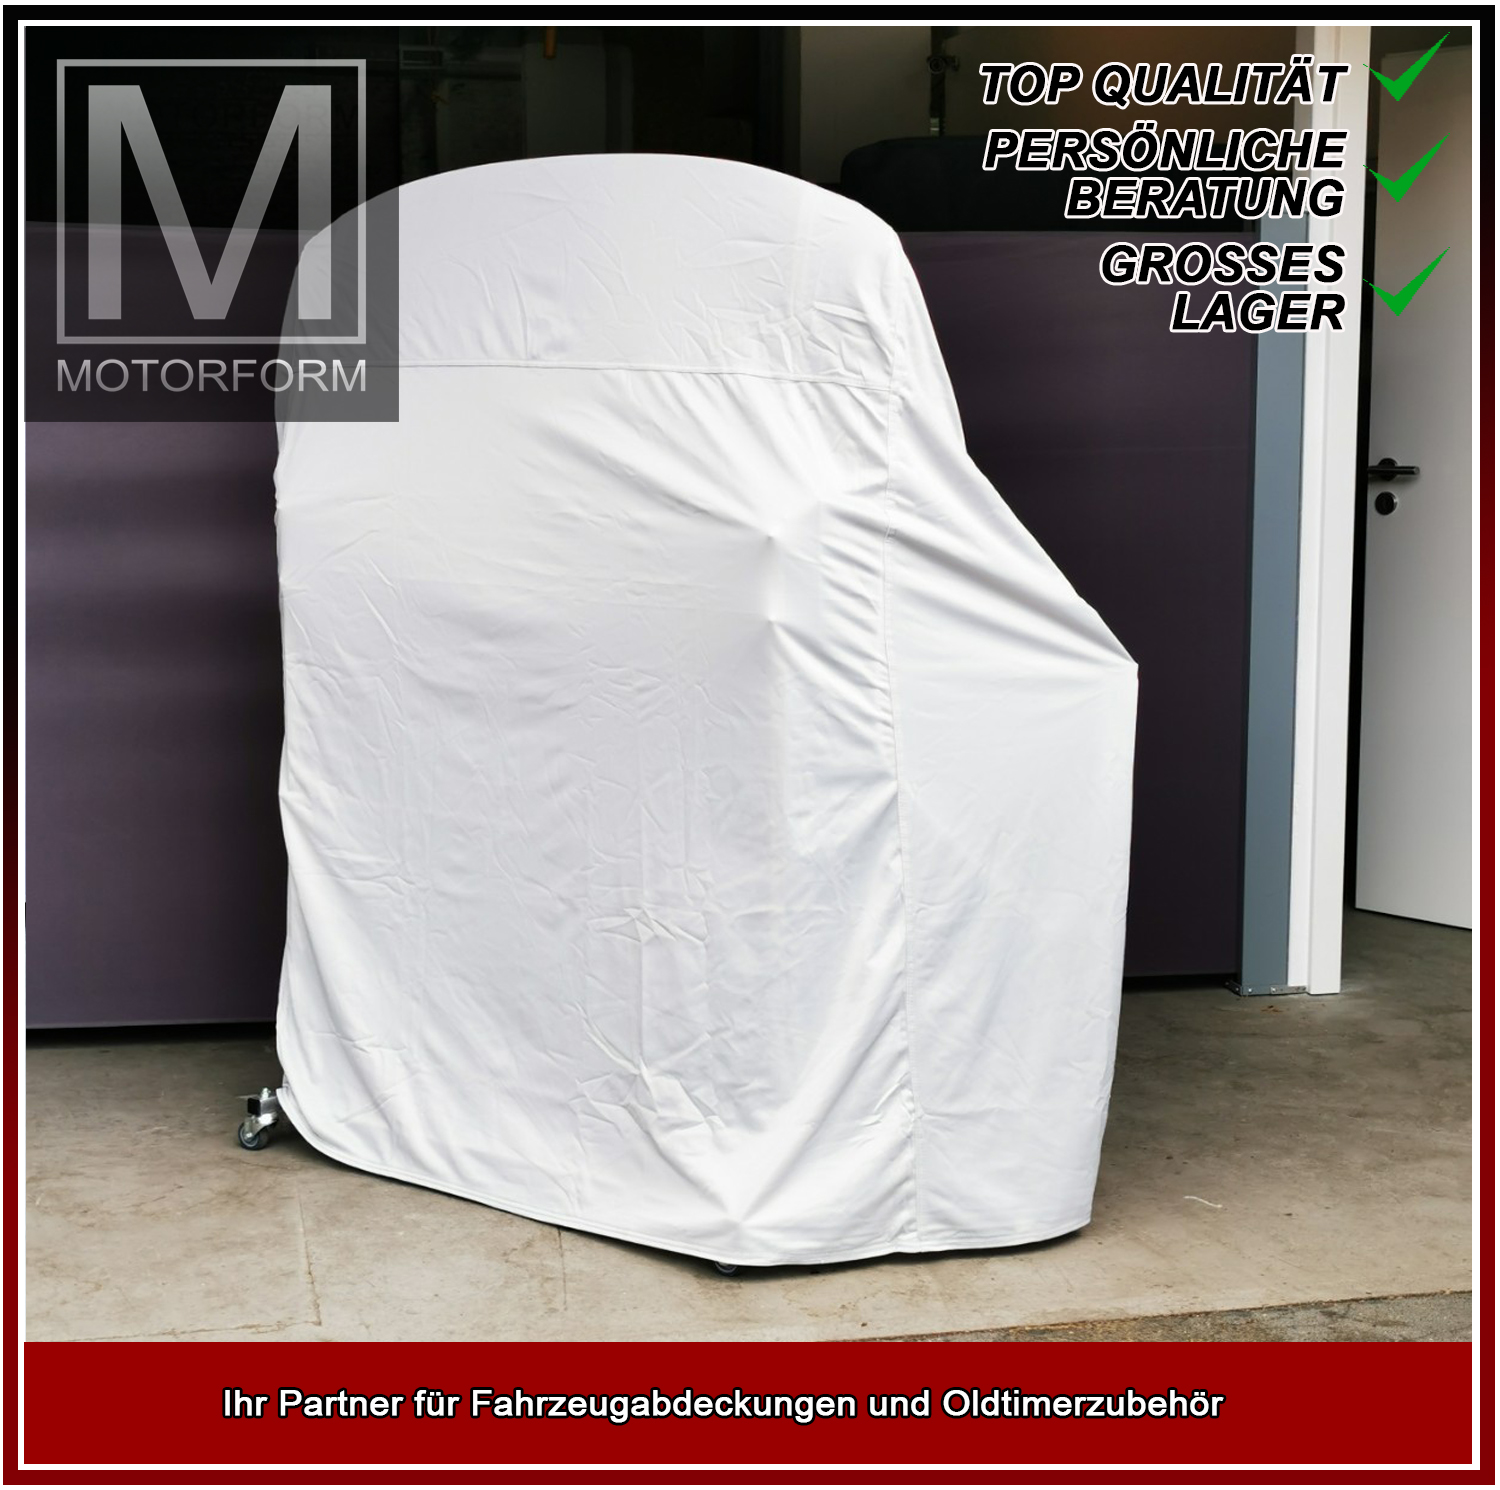 Silver Series Hardtop-Cover for Hardtop-Cover Peugeot 204 Conver